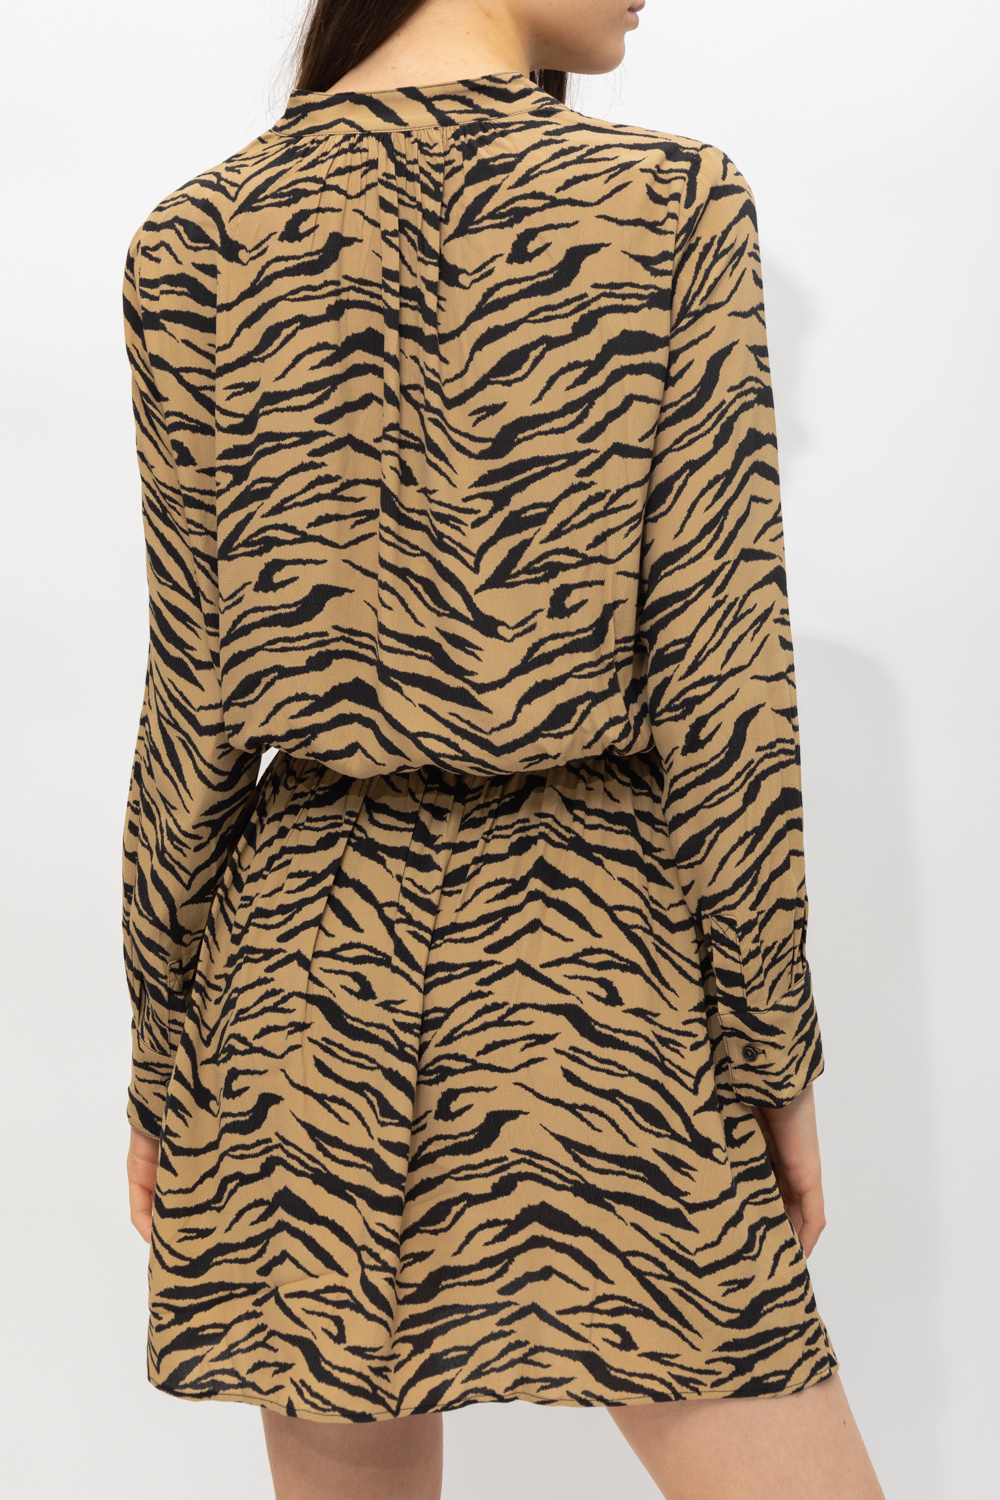 Zadig & Voltaire ‘Rinka’ dress with animal motif | Women's Clothing ...